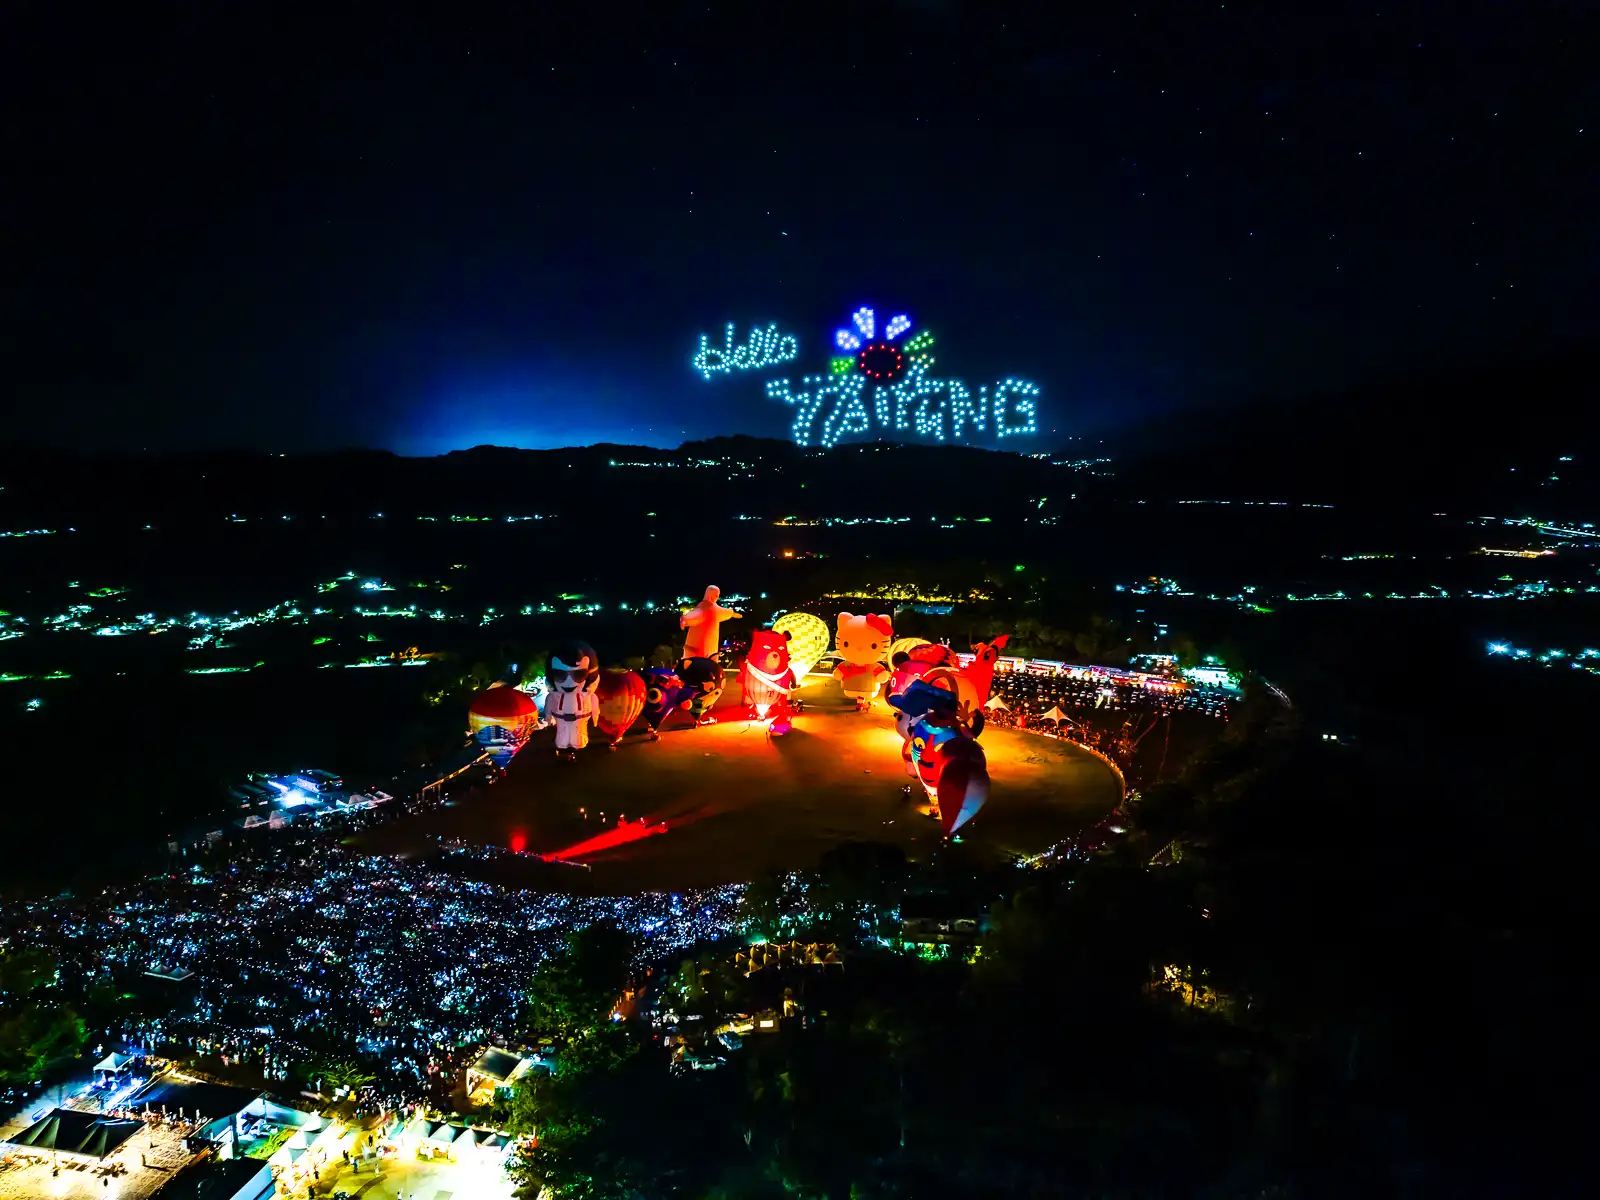 Drones have spelled out "Hello Taitung" in the night sky during a light show.